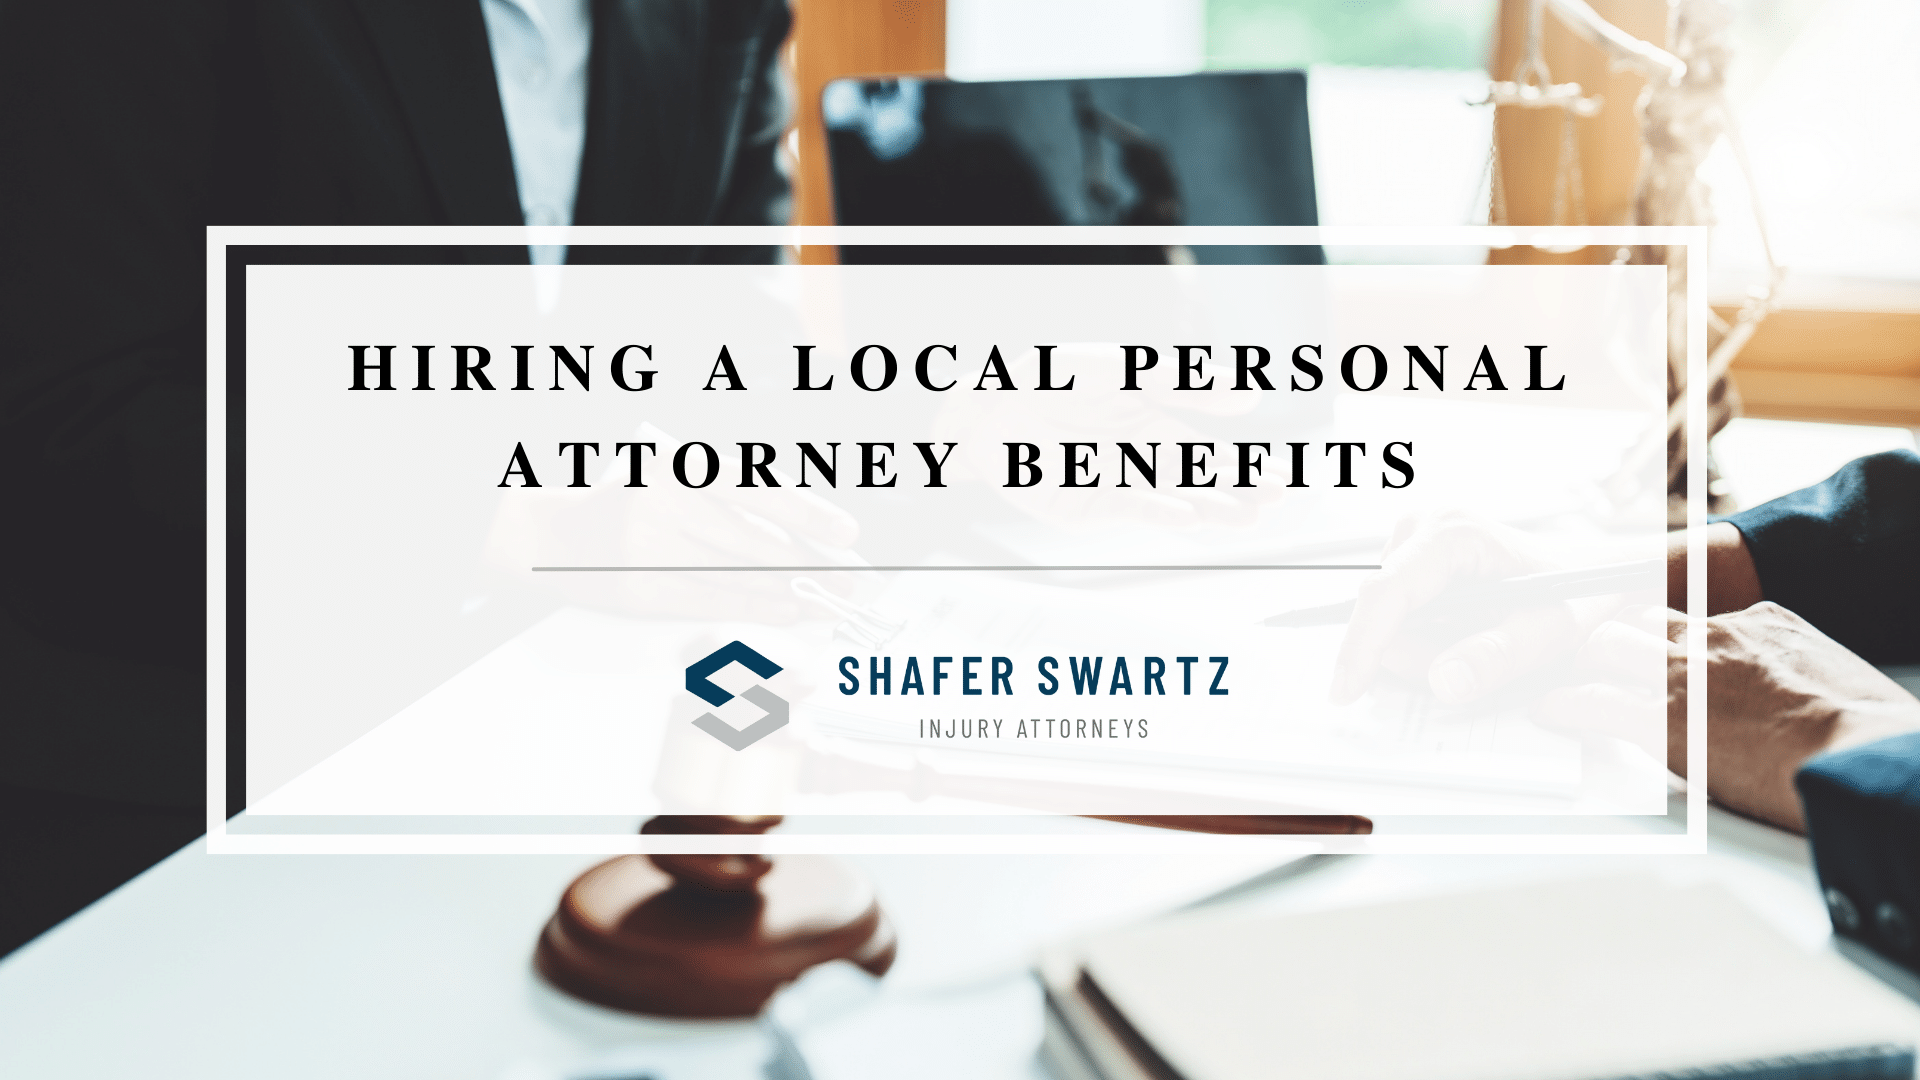 Featured image of hiring a local personal attorney benefits